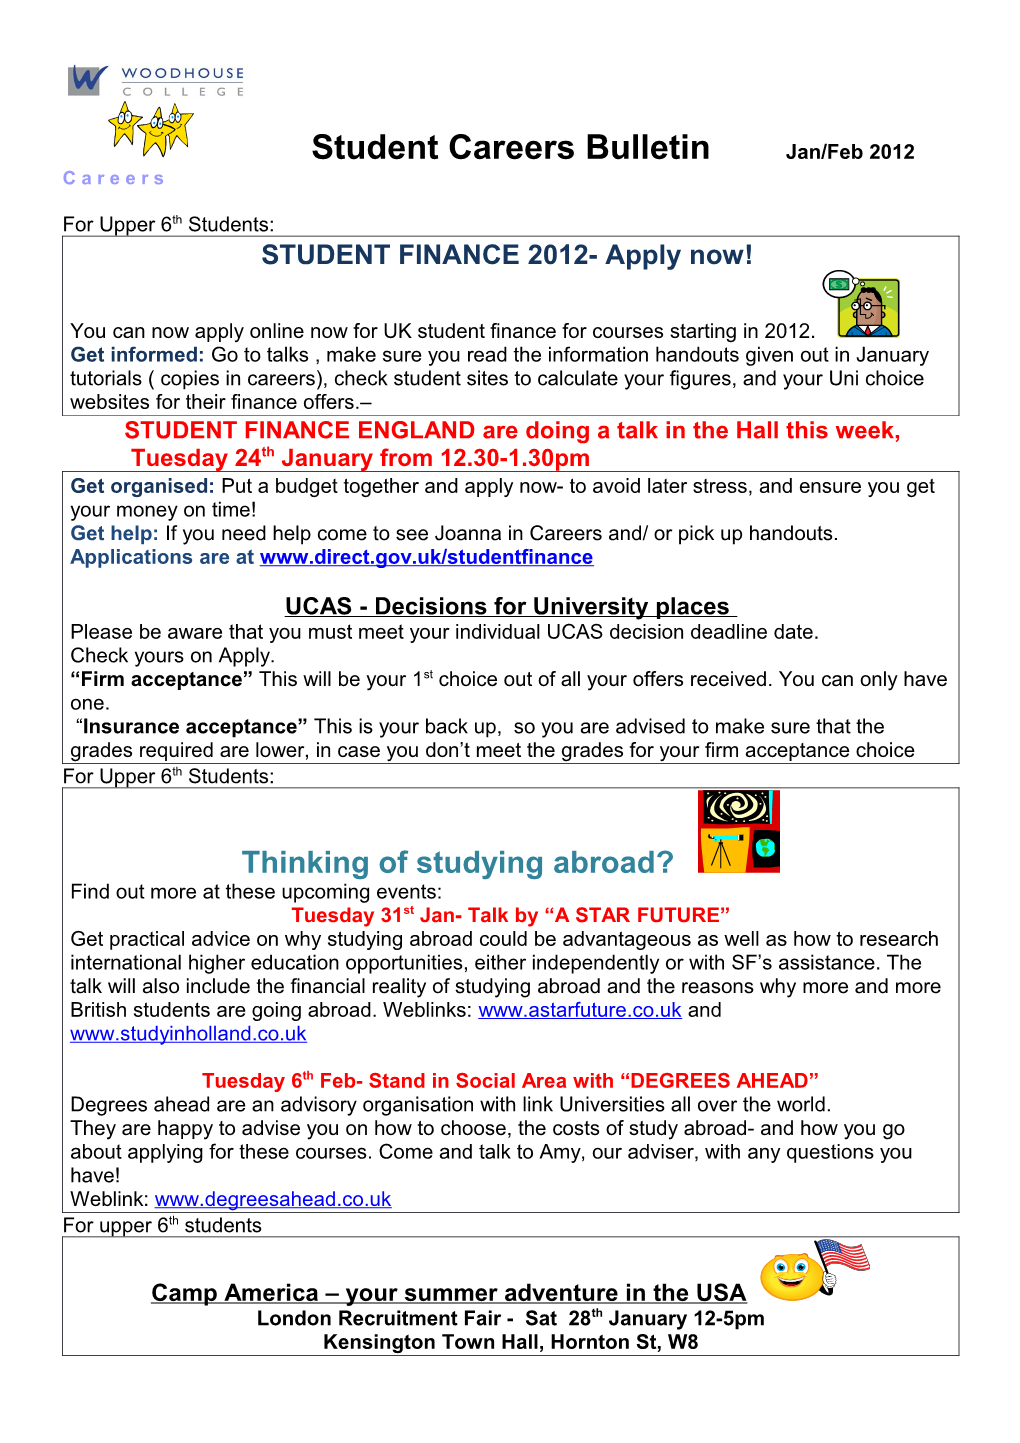 STUDENT FINANCE 2012- Apply Now!